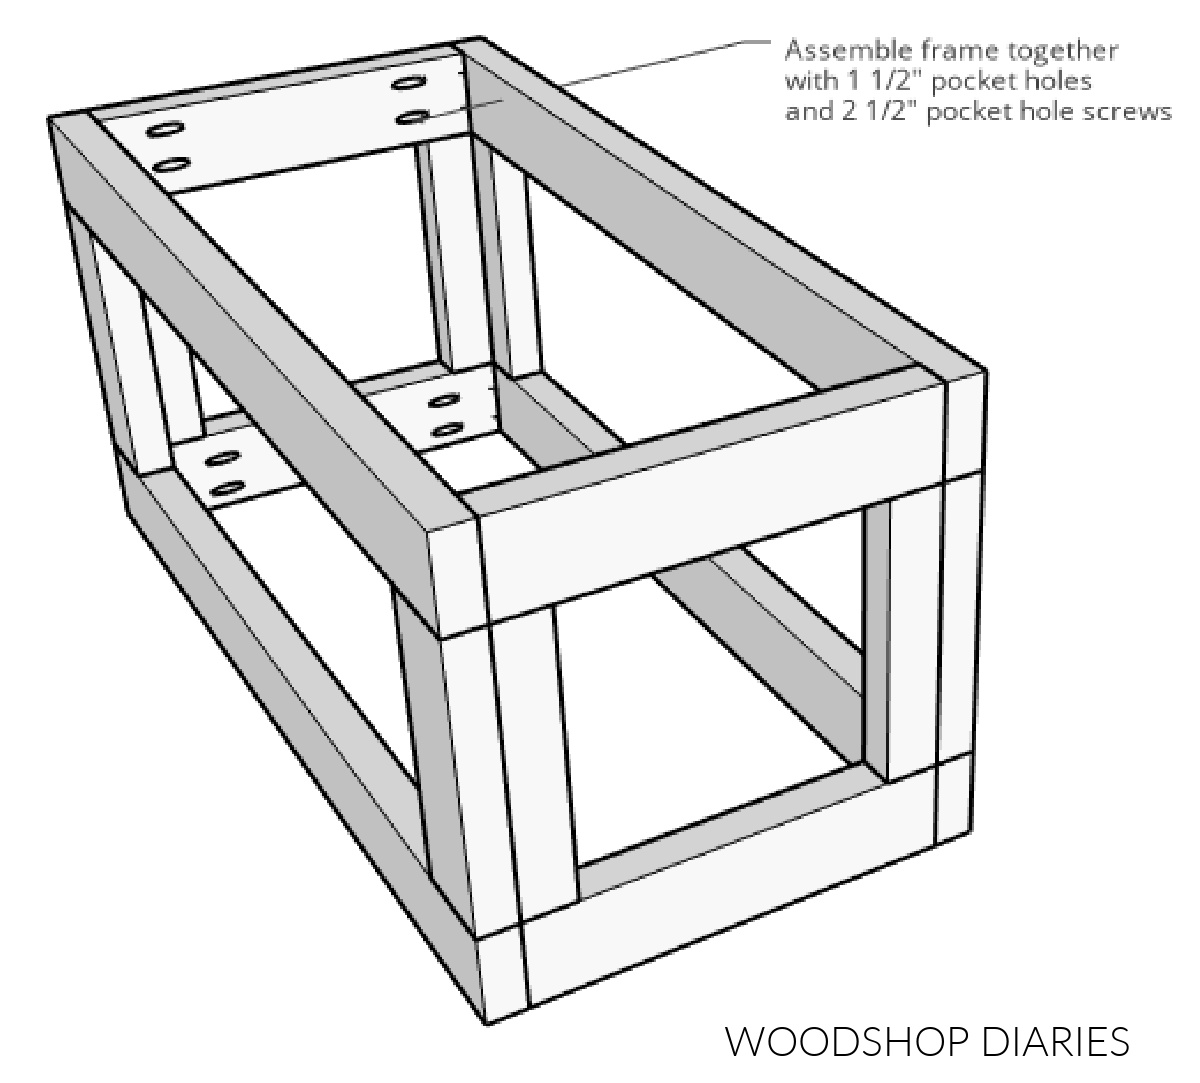 Main Christmas tree skirt box frame assembly diagram made from 2x4s